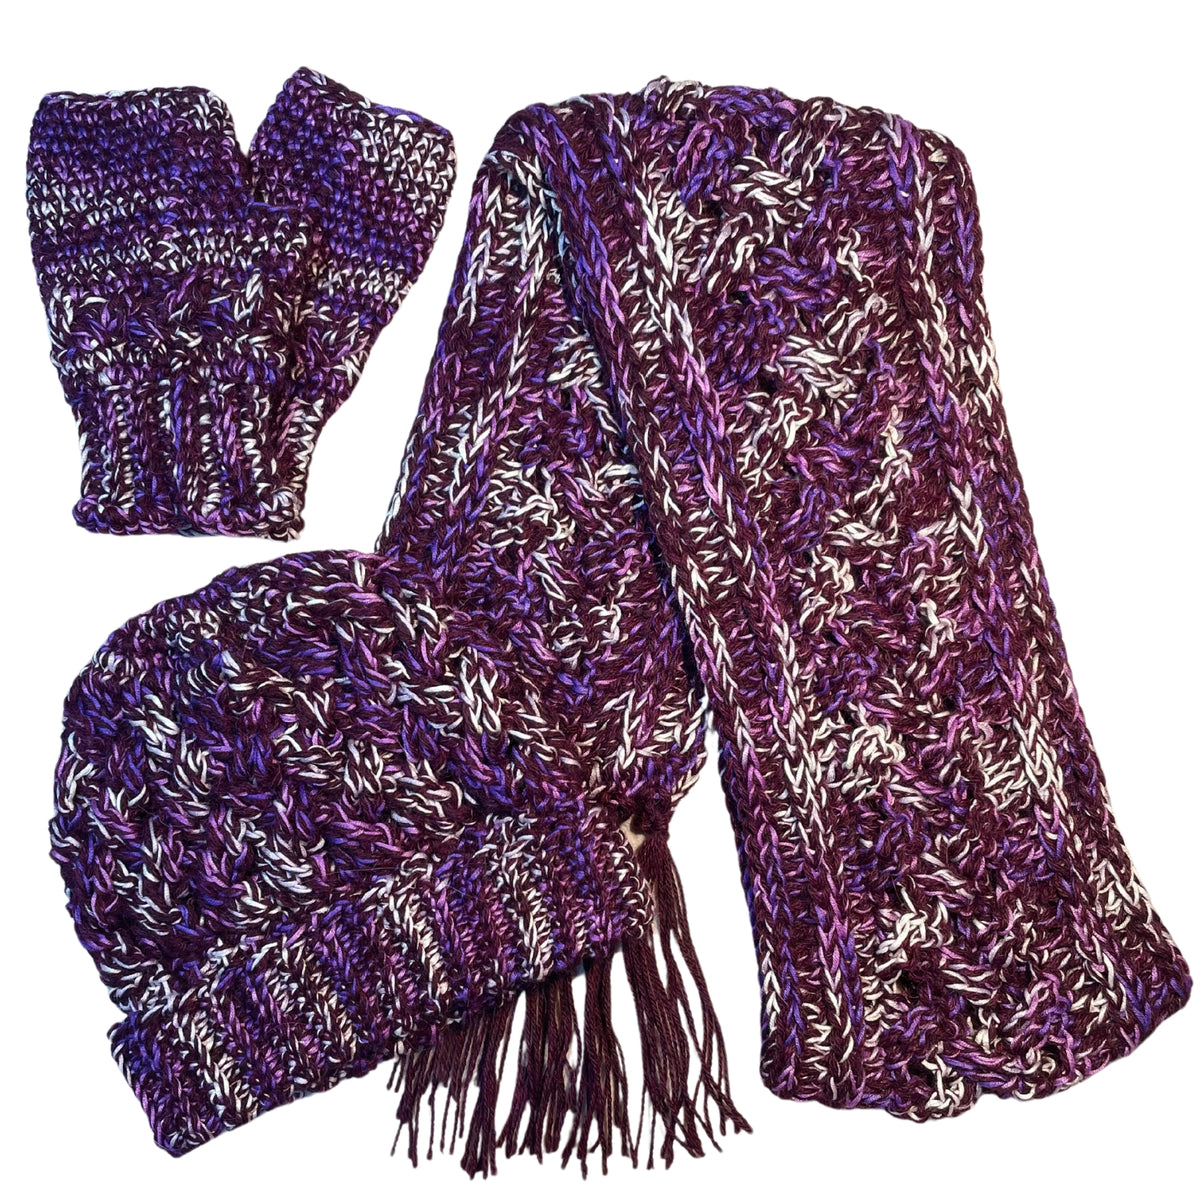 Cozy soft warm alpaca and bamboo matching set of ridge ribbed hat, scarf with long tassels, and ridge ribbed mittens for winter fashion. Handmade knitted crochet items made from yarn in the colors deep purple, bright purple violet, and white